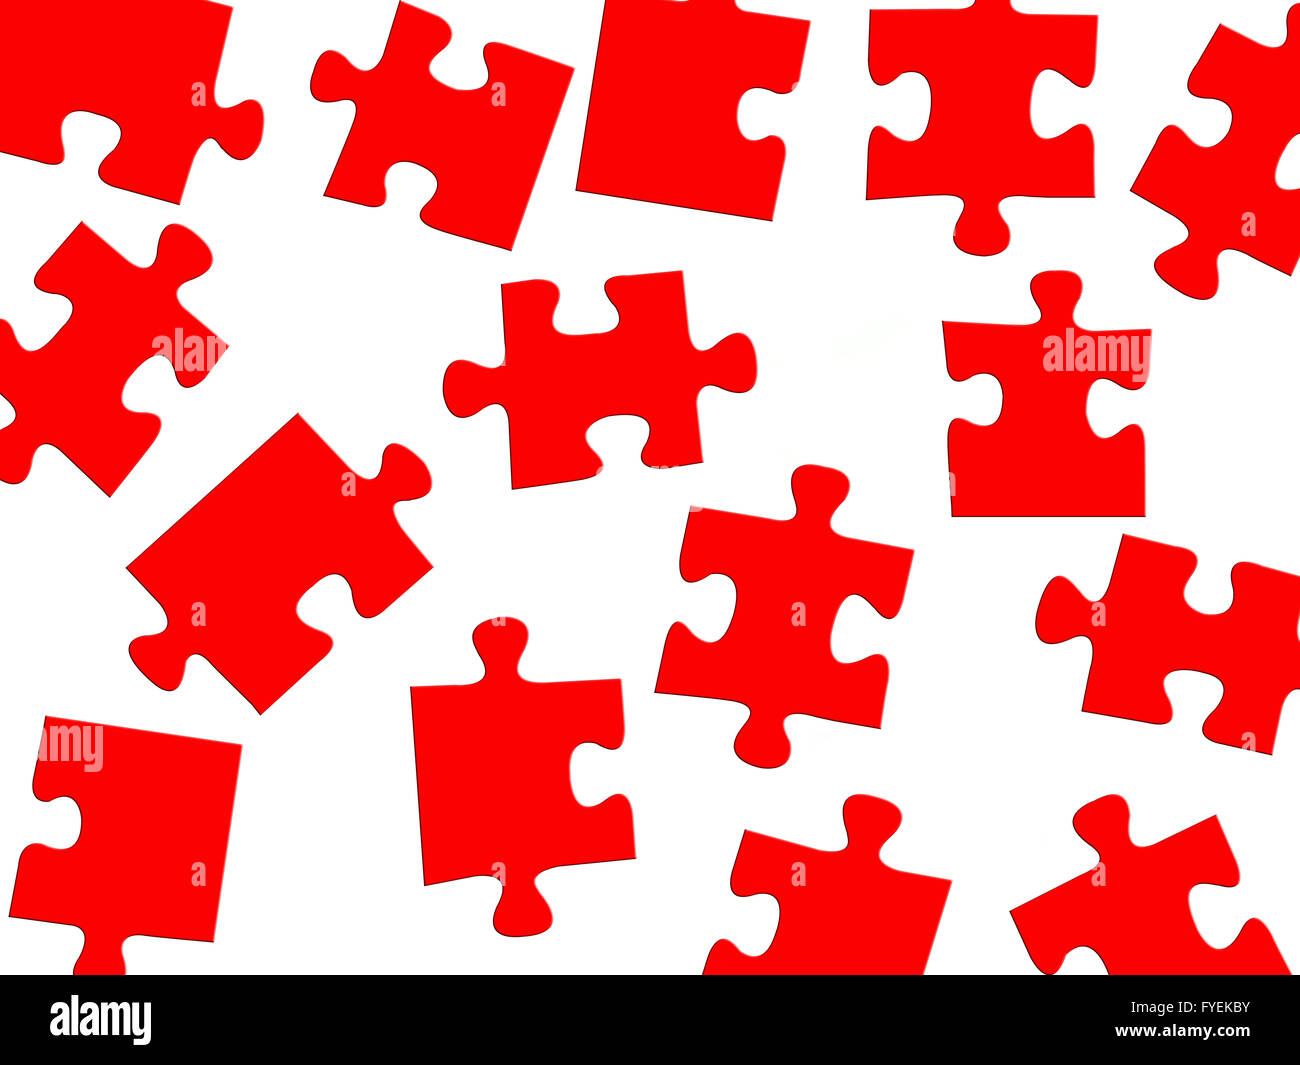 Jigsaw puzzle pieces isolated against a white background Stock Photo